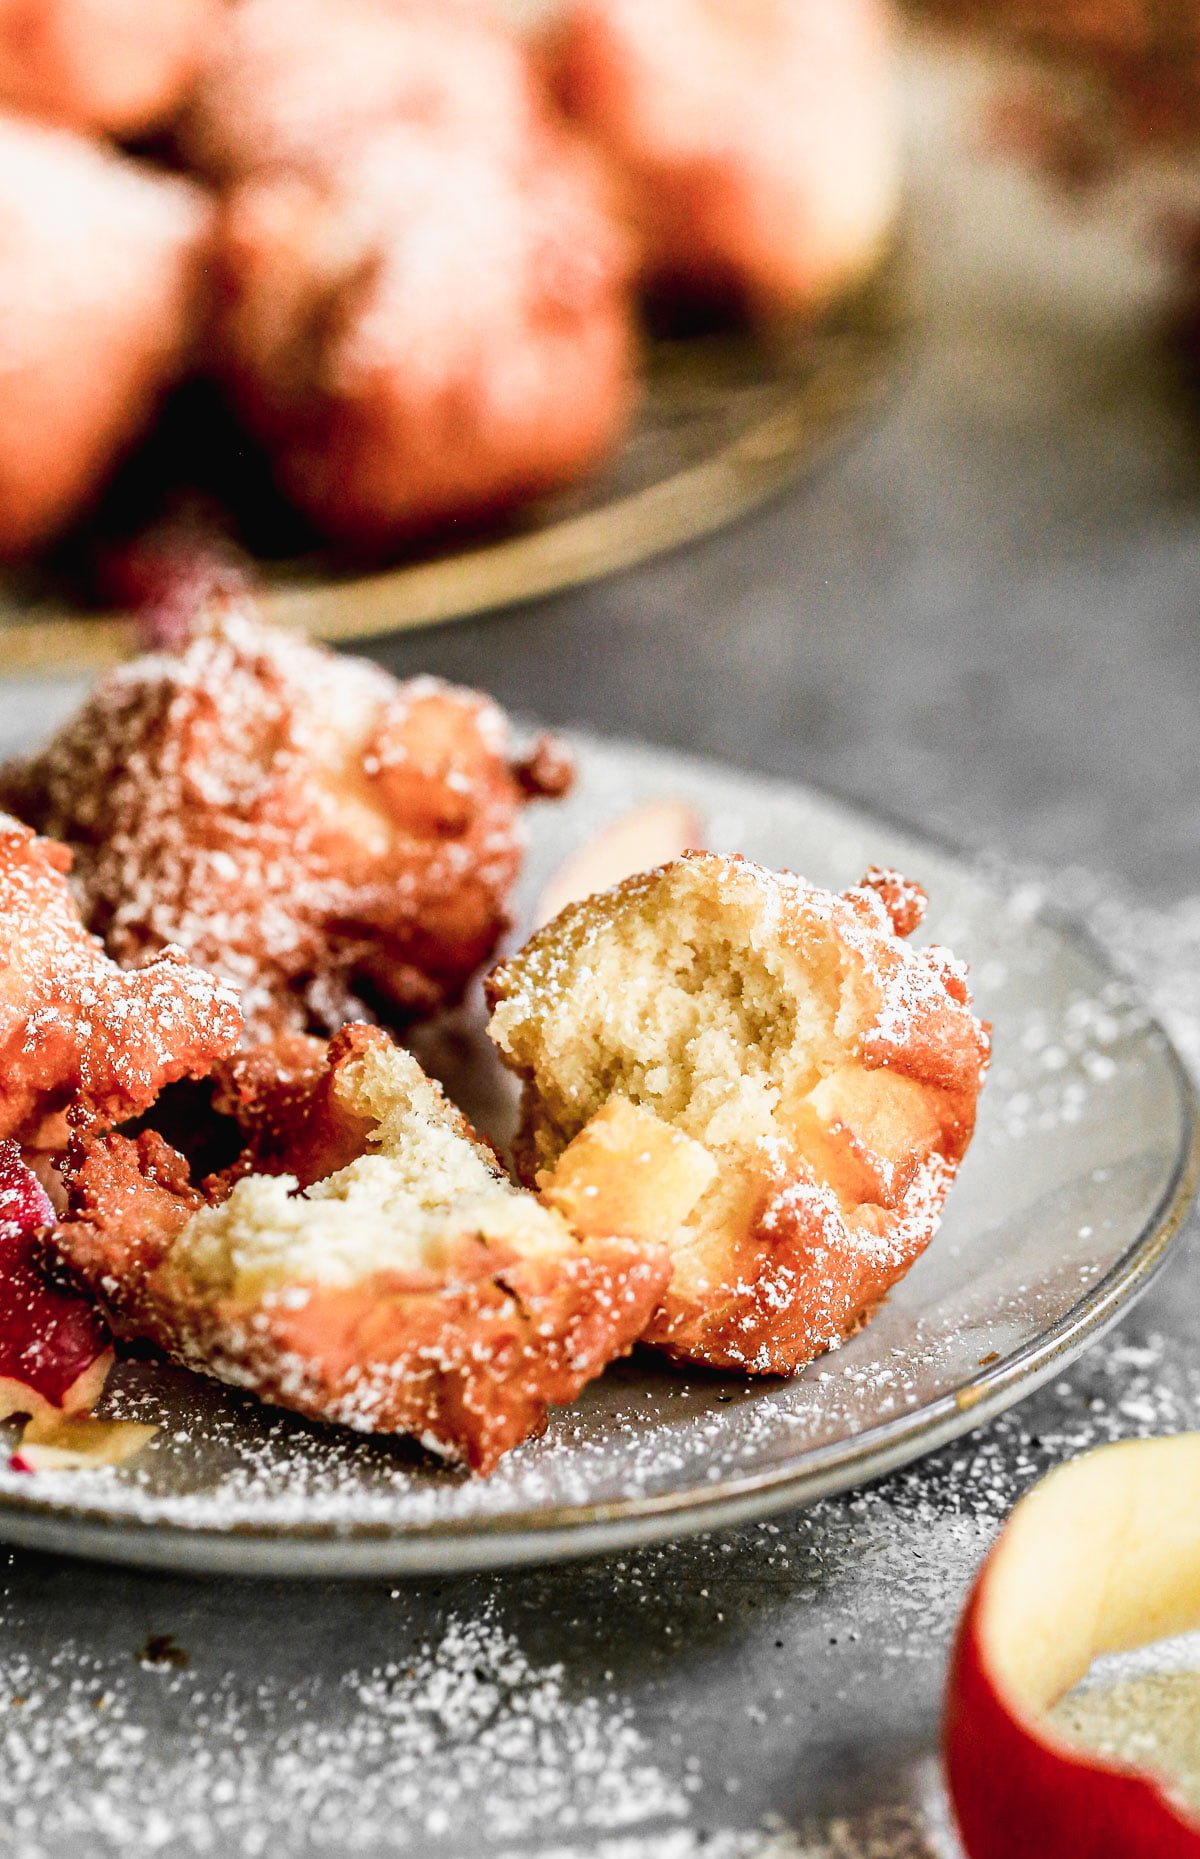 Crispy on the outside, tender and packed with apples on the inside and downright addictive, this Apple Fritter Recipe is hands-down the hit of our fall dessert season.&nbsp;